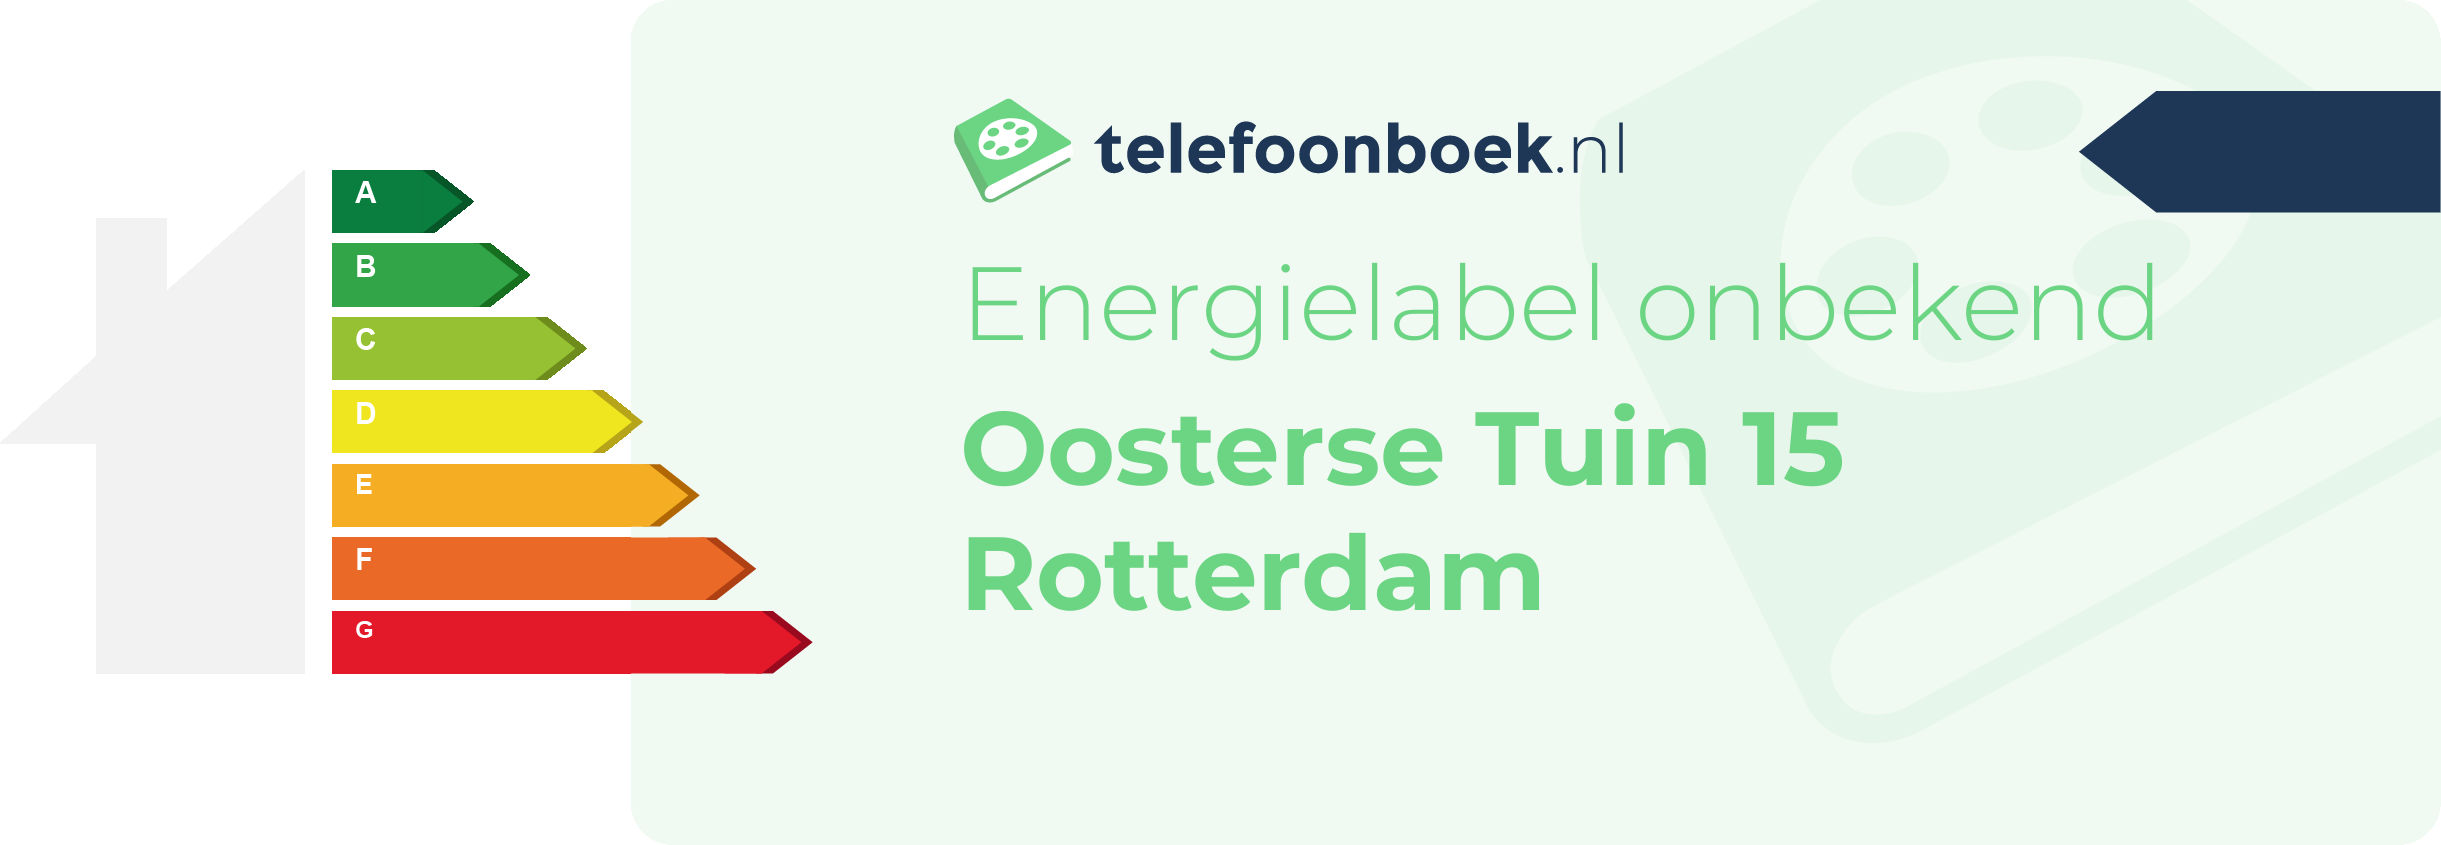 Energielabel Oosterse Tuin 15 Rotterdam